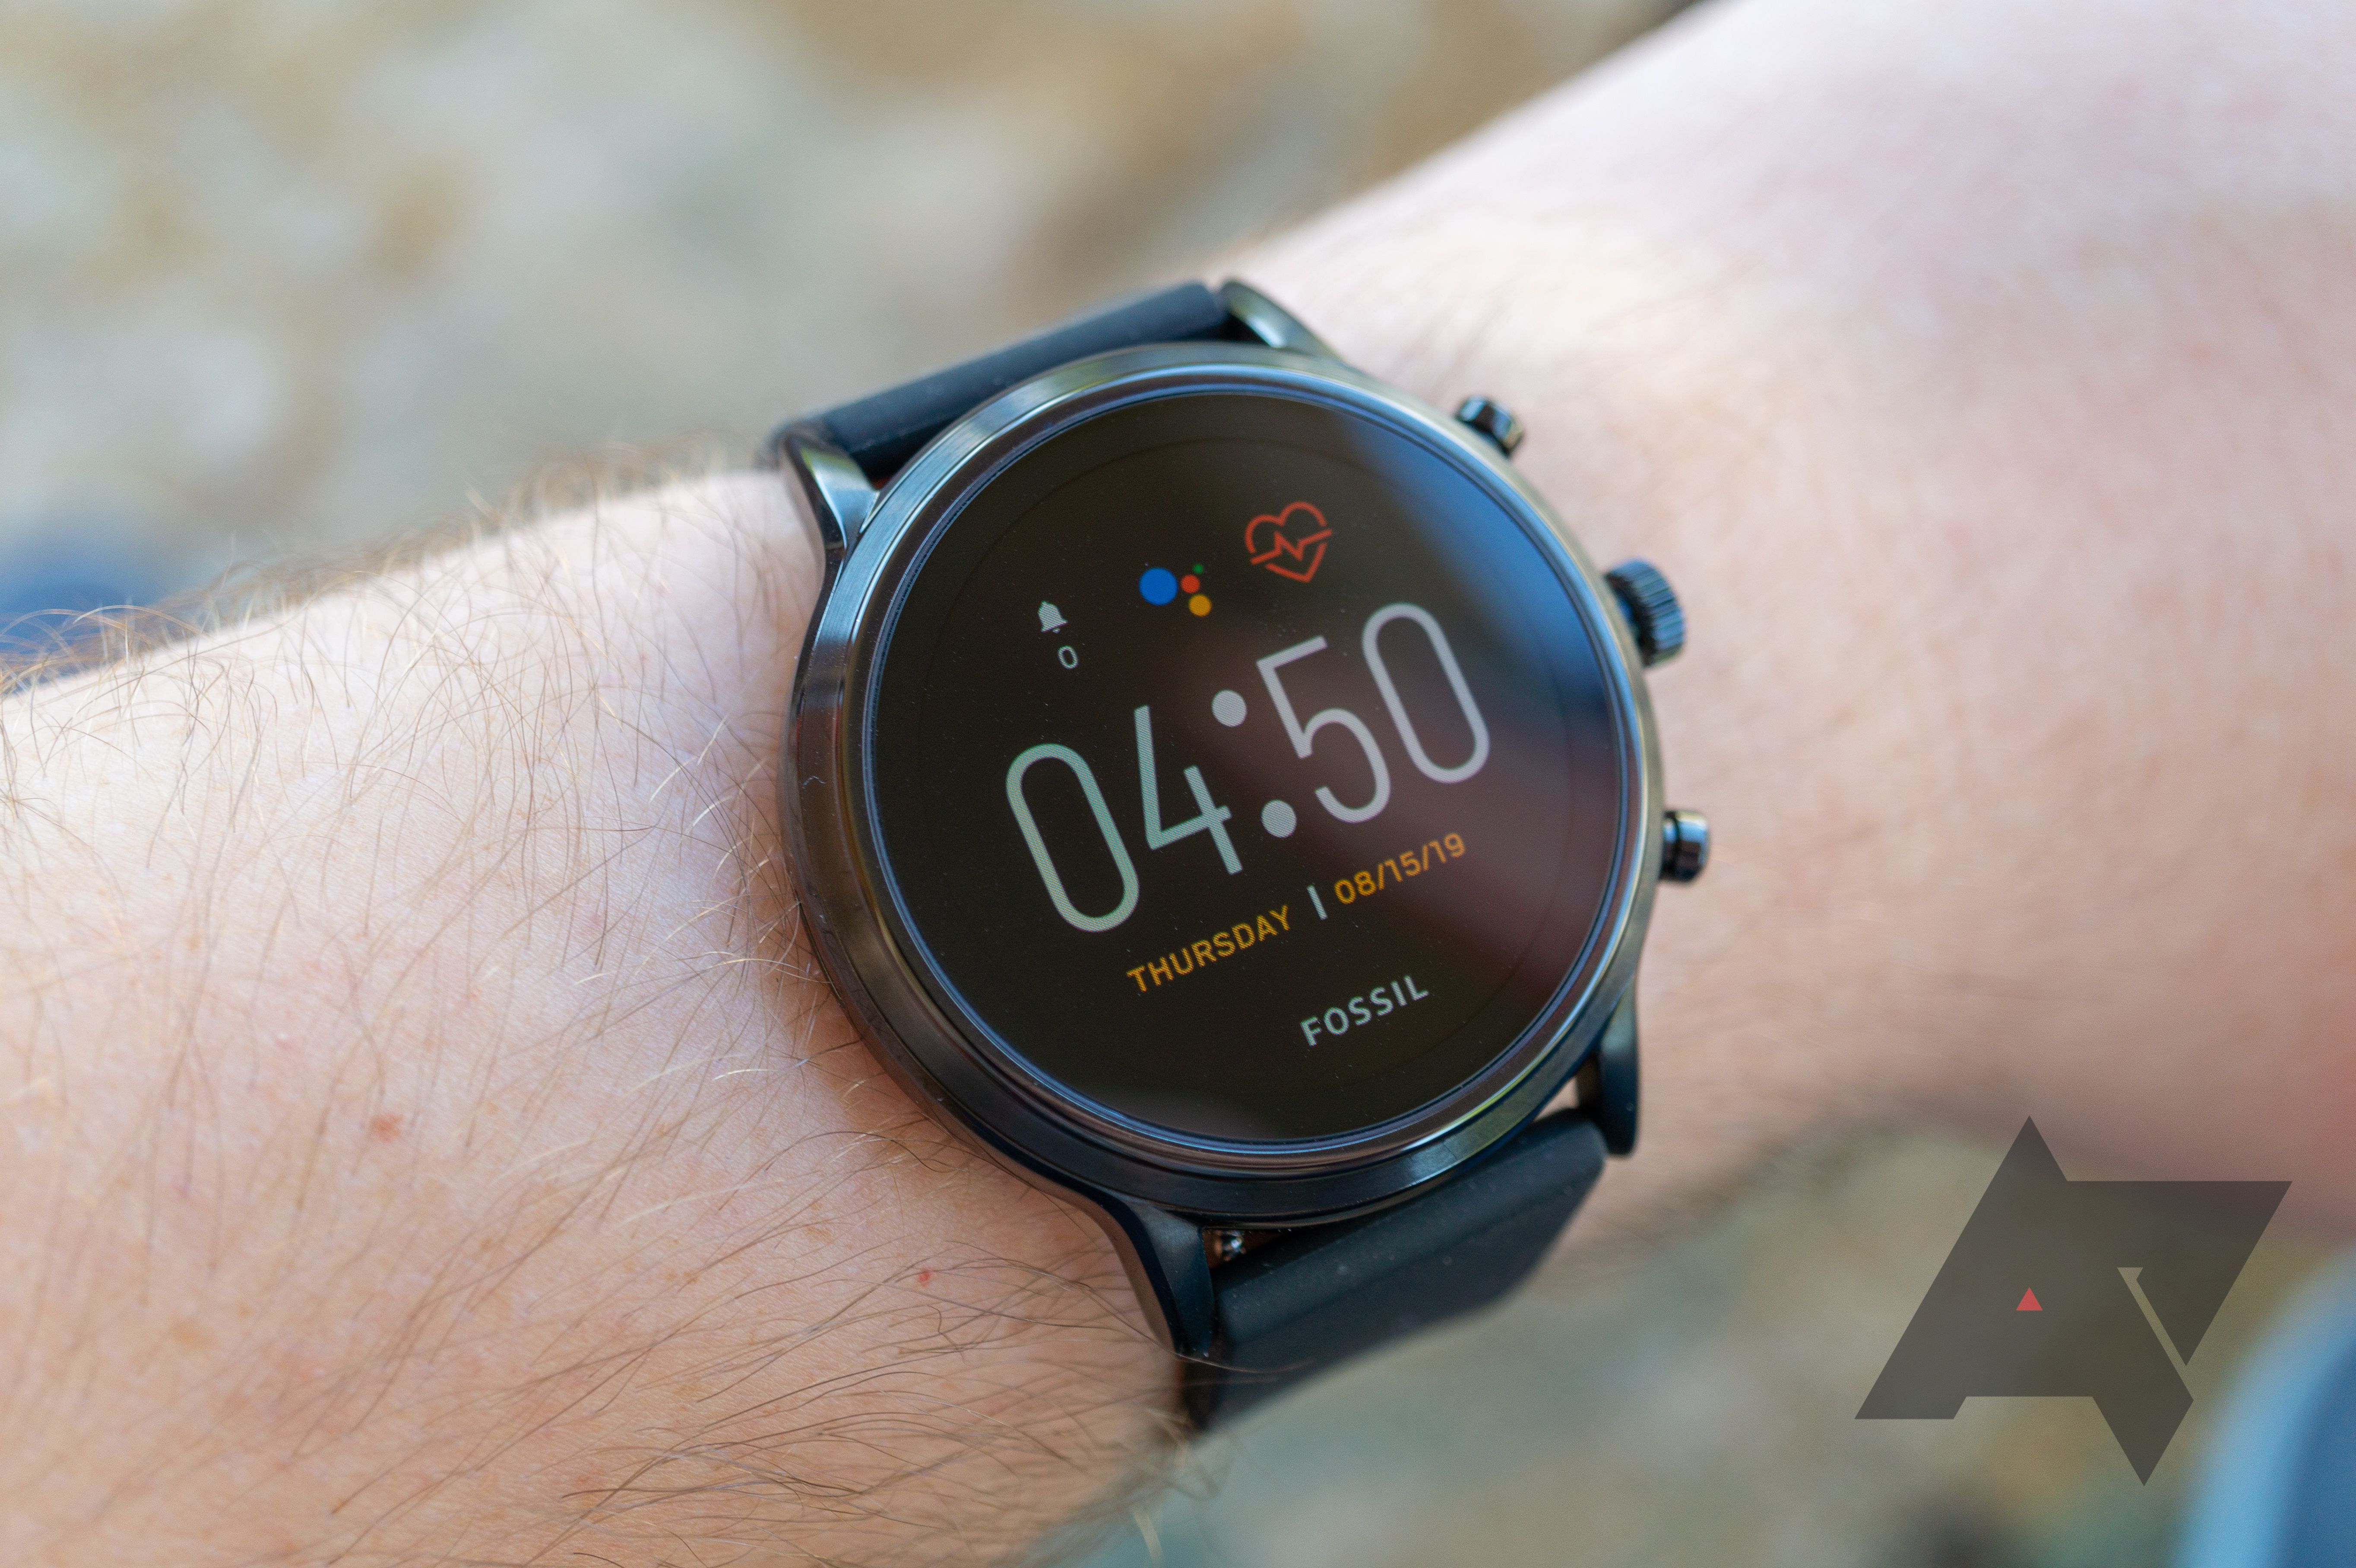 Fossil removed more than of its watch faces 5 wearables in latest update